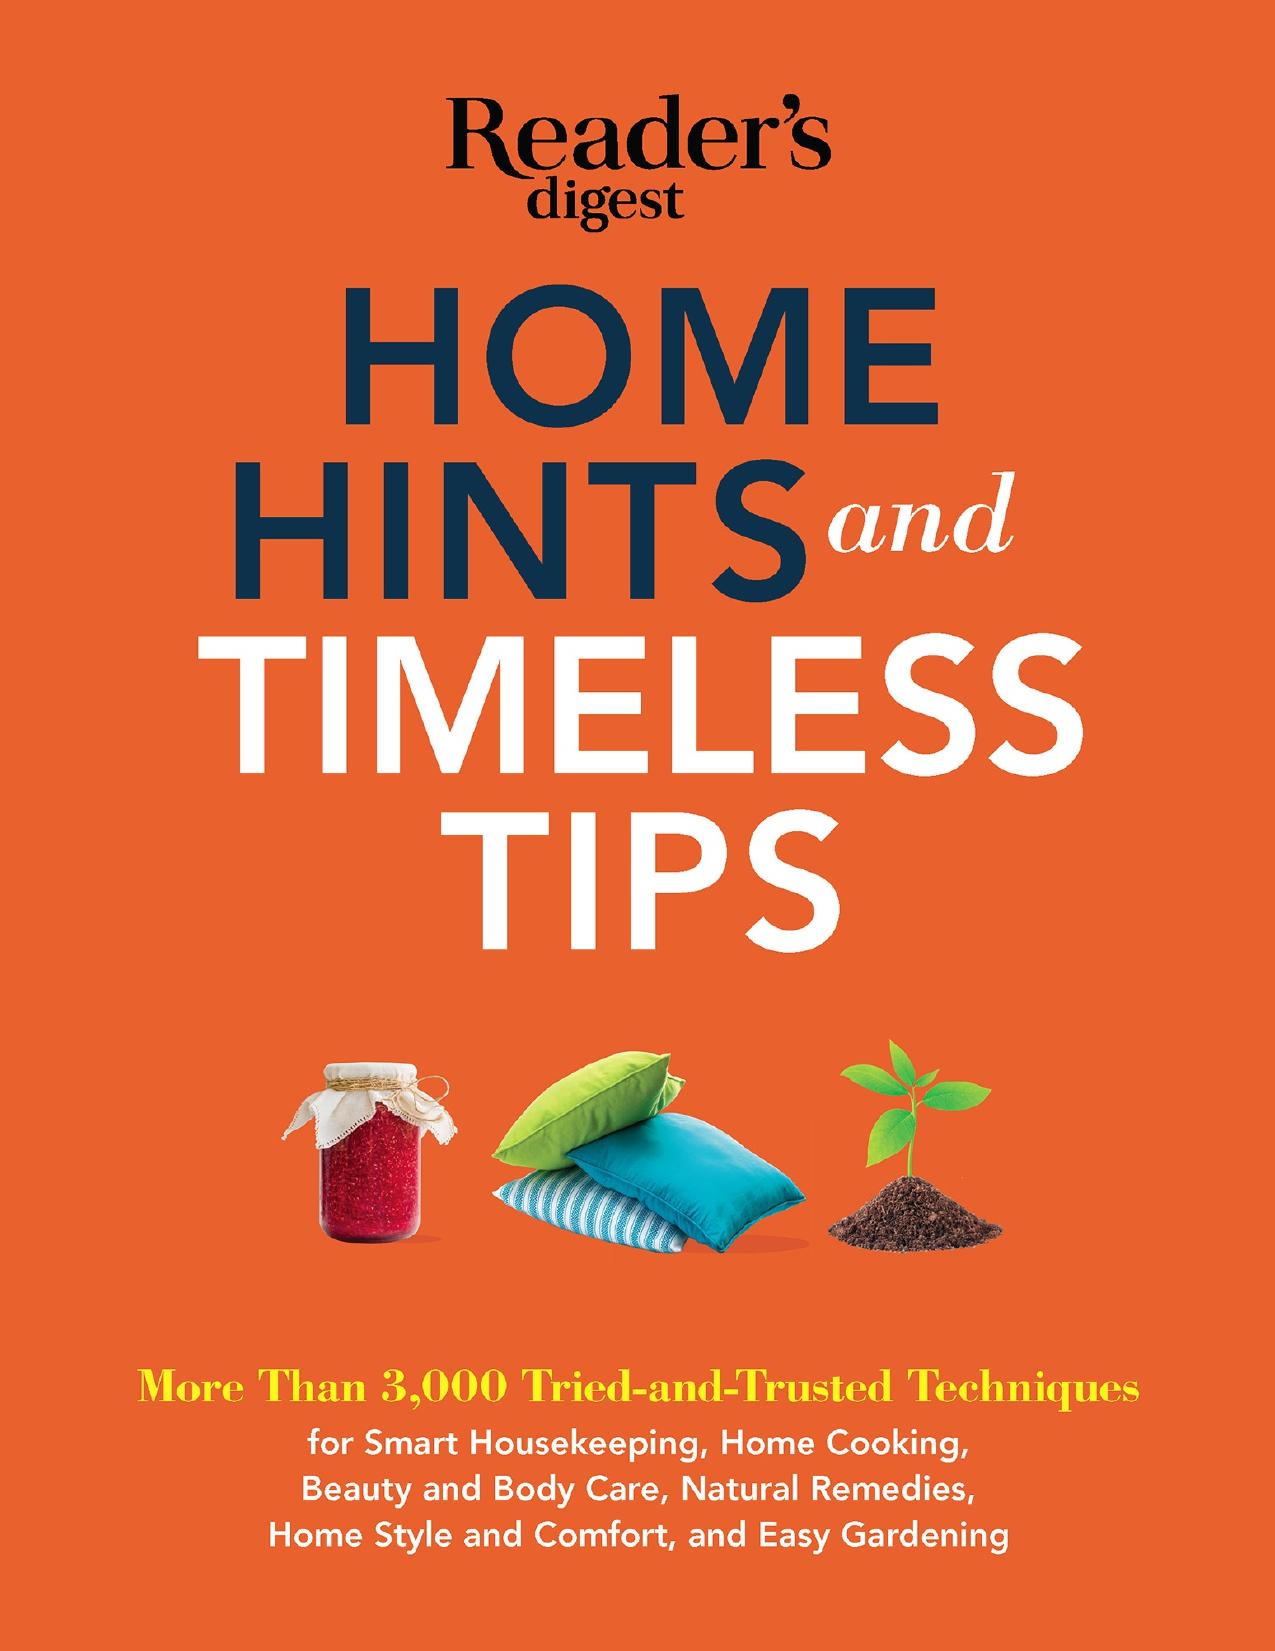 Home hints and timeless tips : more than 3,000 tried-and-trusted techniques for smart housekeeping, home cooking, beauty and body care, natural remedies, home style and comfort, and easy gardening - PDFDrive.com